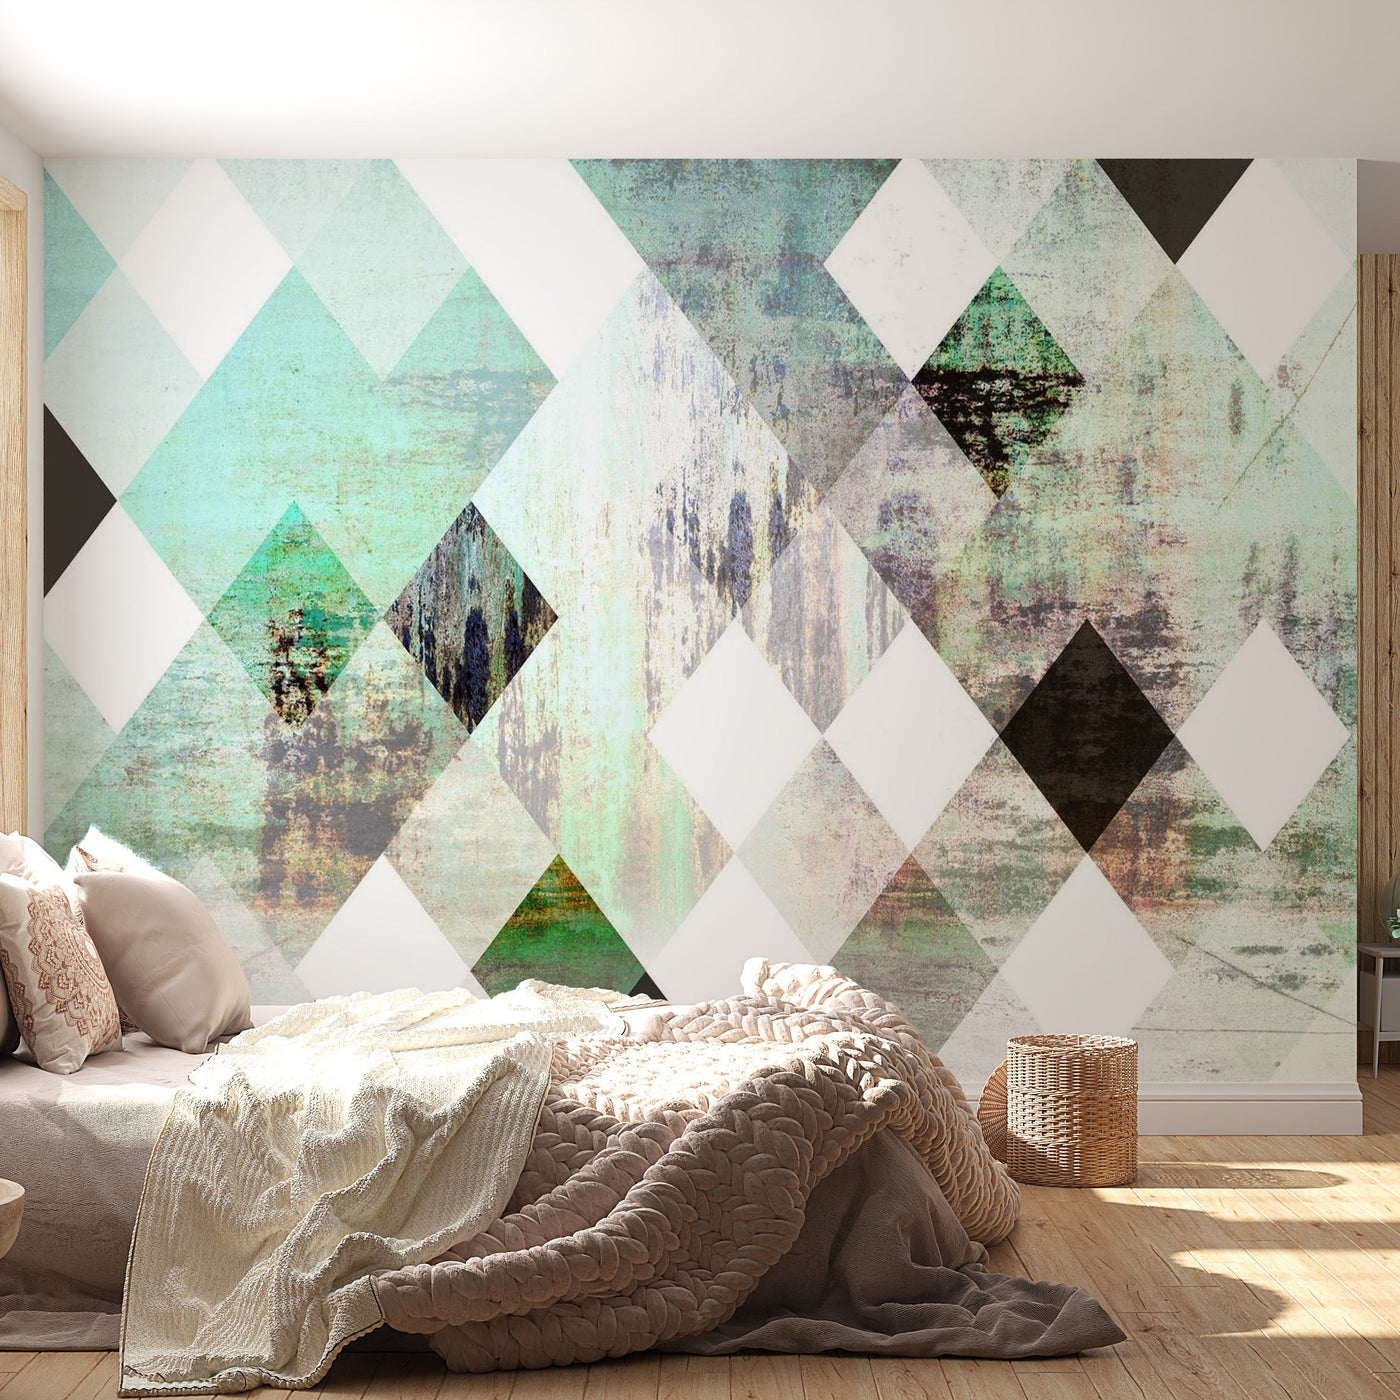 Peel & Stick Wall Mural - Green Geometric Vintage Concrete Pattern - Removable Wall Decals